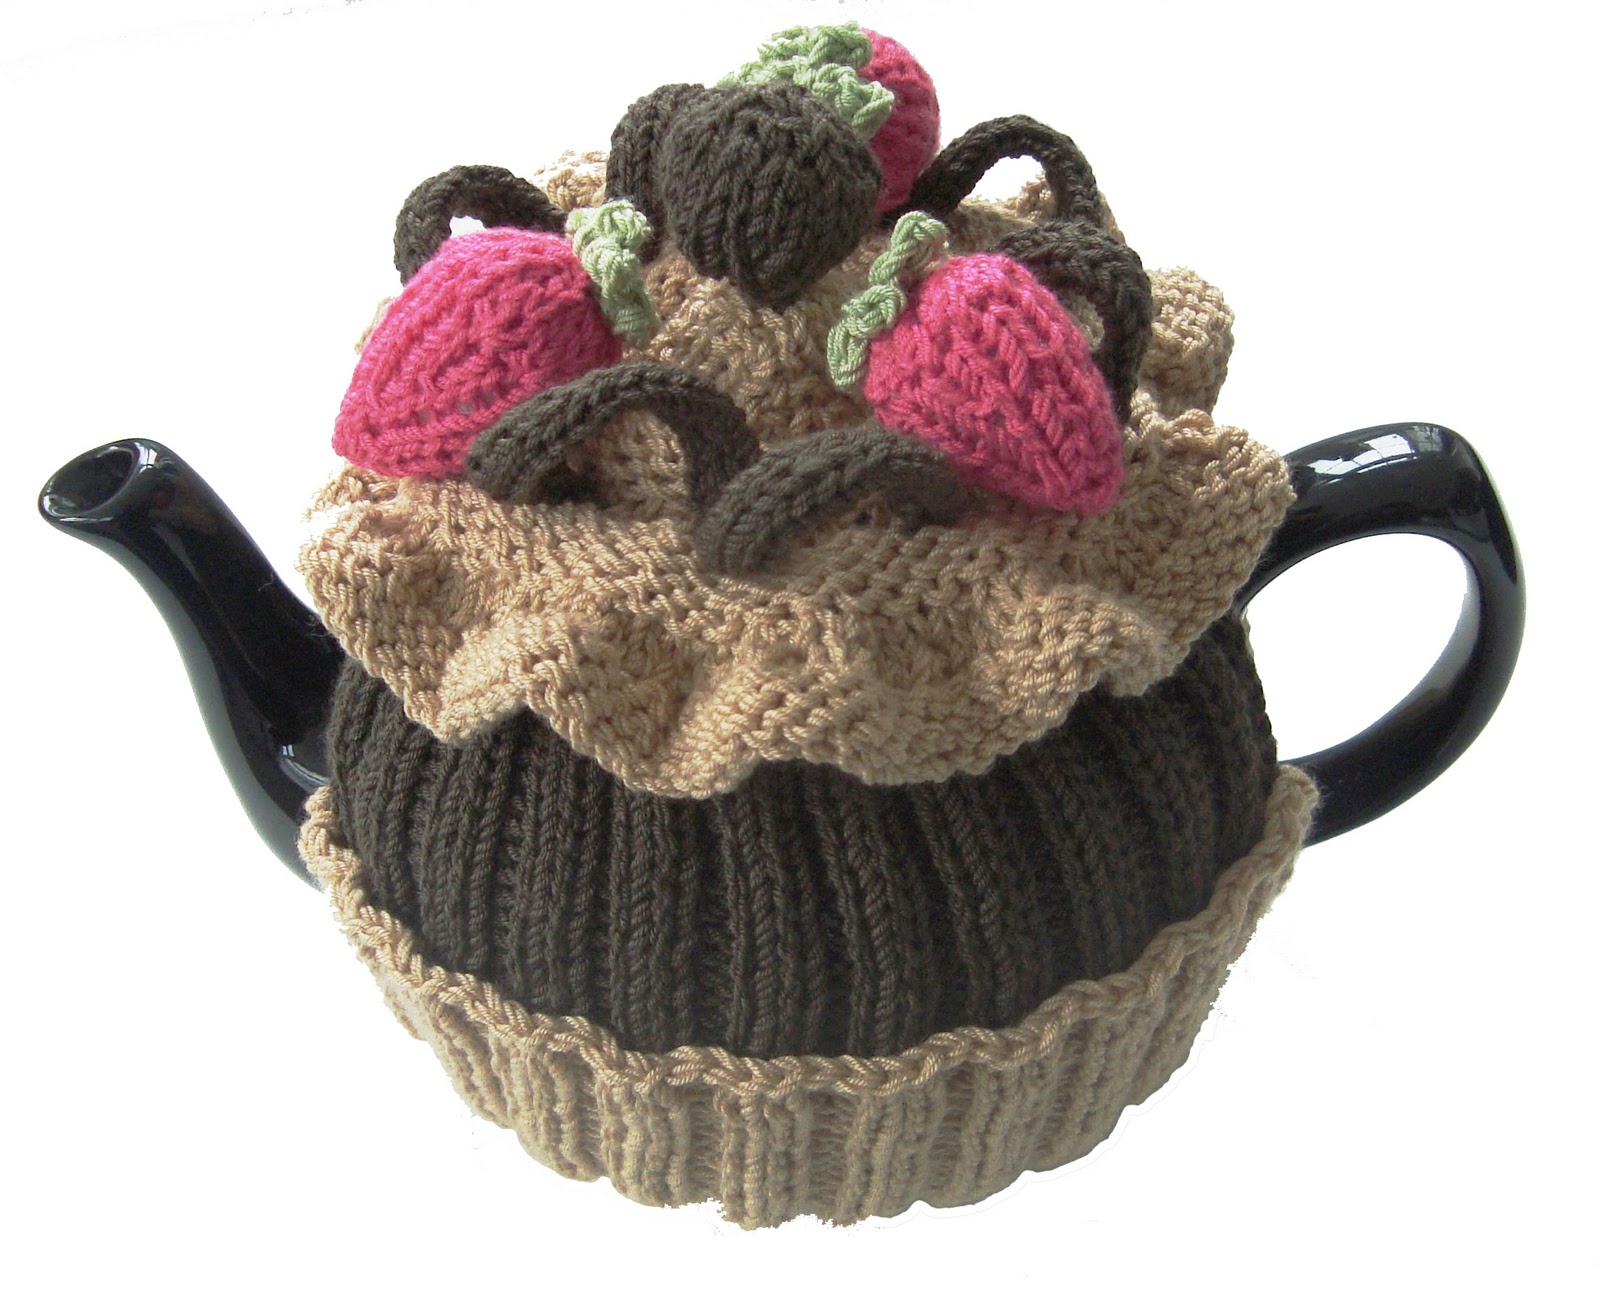 chocolate cup cake images The Chocolate Cupcake Tea Cosy Knitting Pattern and Knitting Workshop